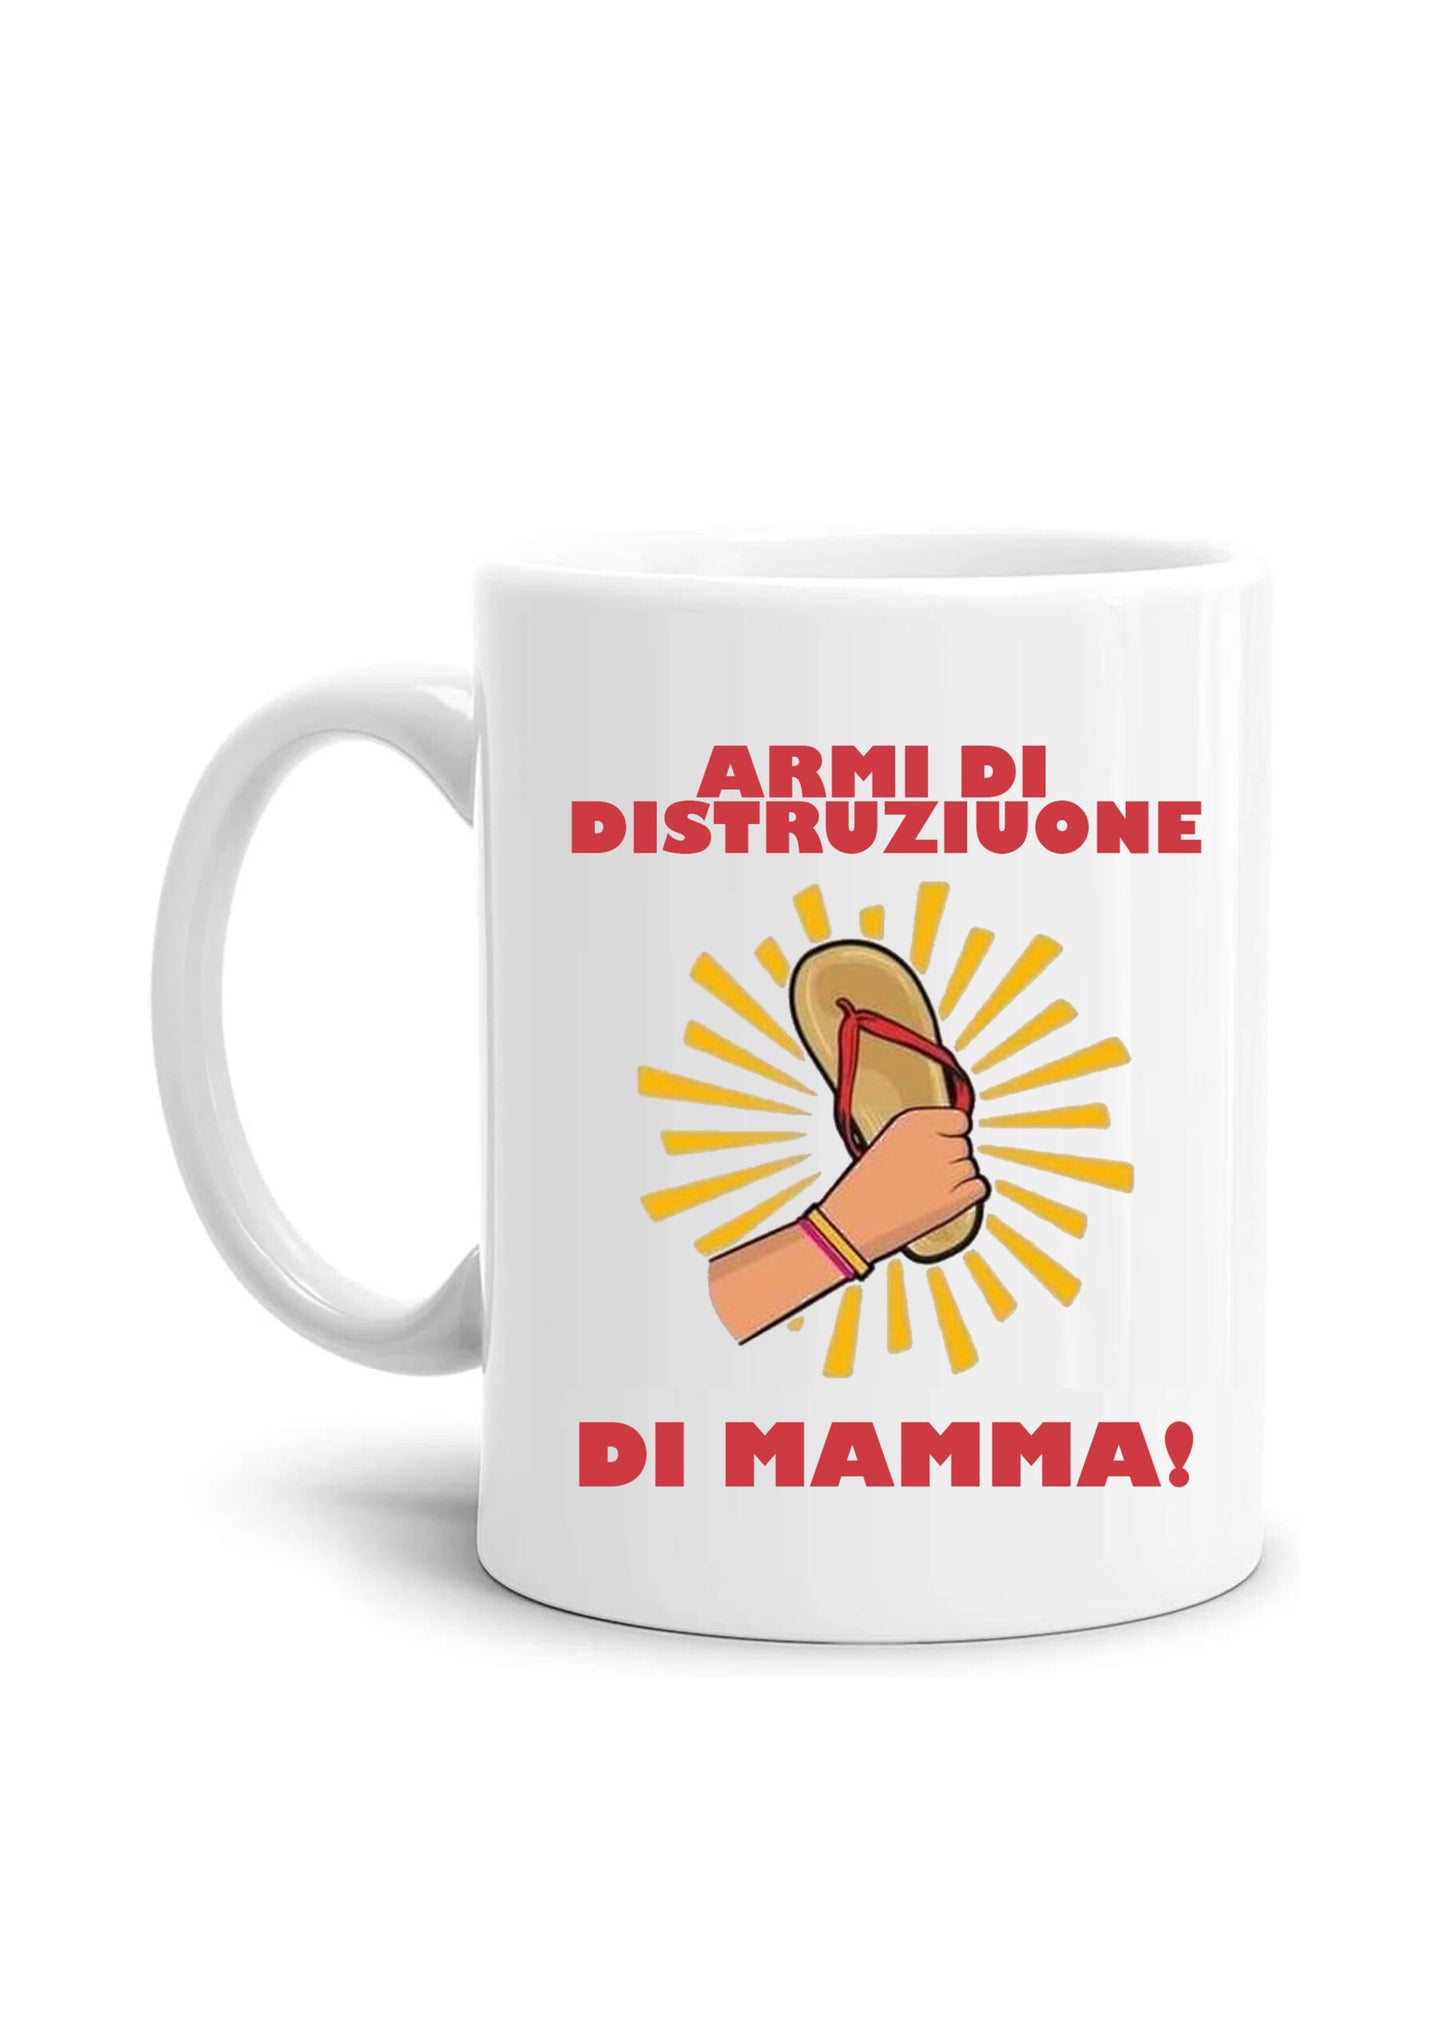 Mug-weapons of destruction of mom funny nice gift mom dad colleagues friends ceramic for breakfast coffee or tea